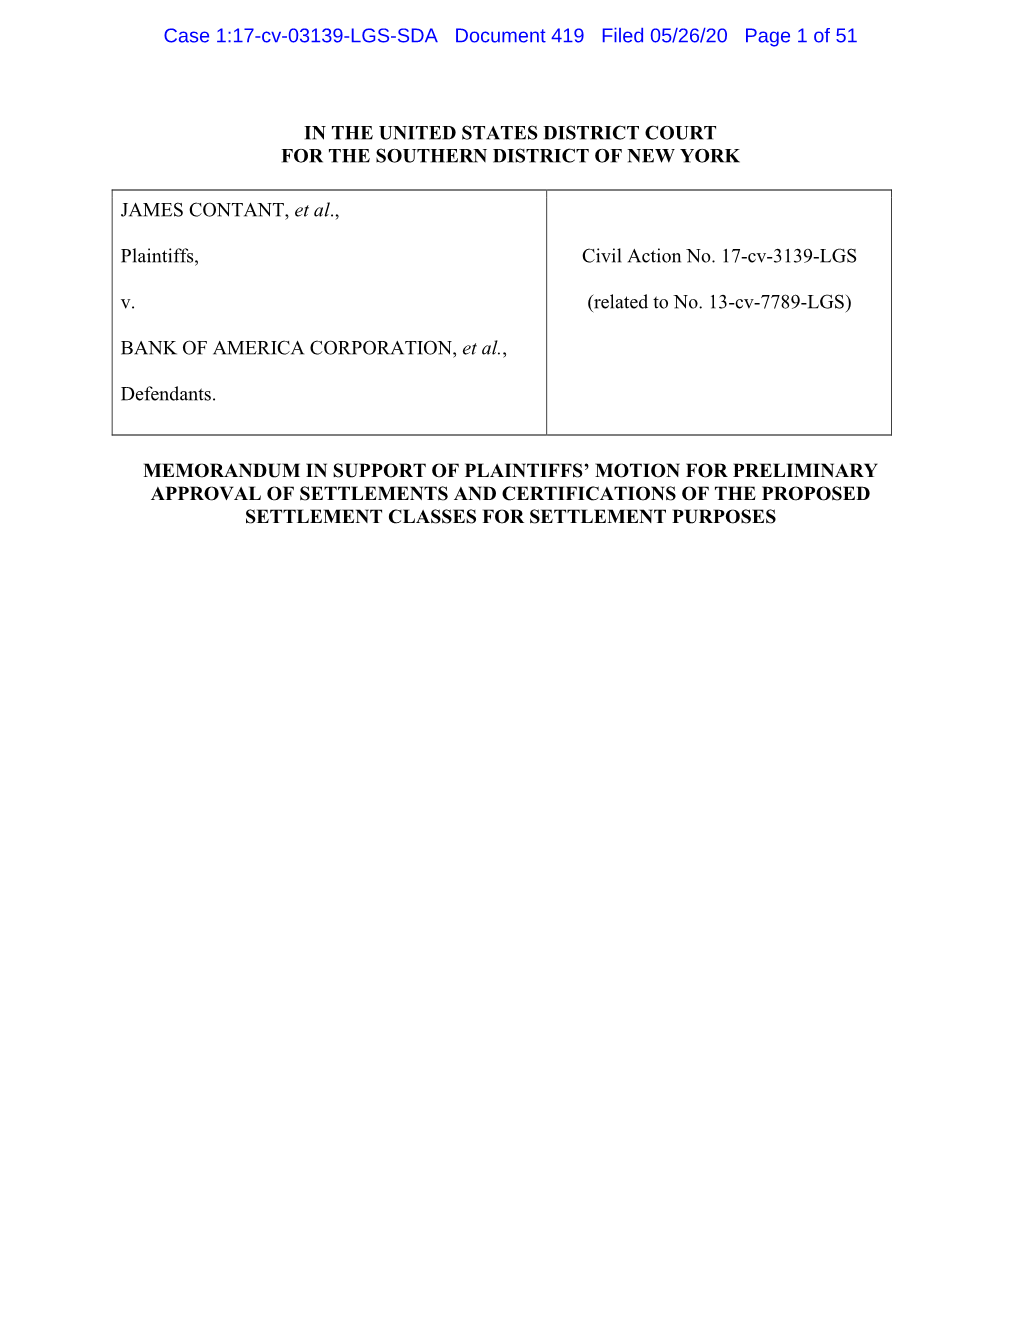 Case 1:17-Cv-03139-LGS-SDA Document 419 Filed 05/26/20 Page 1 of 51